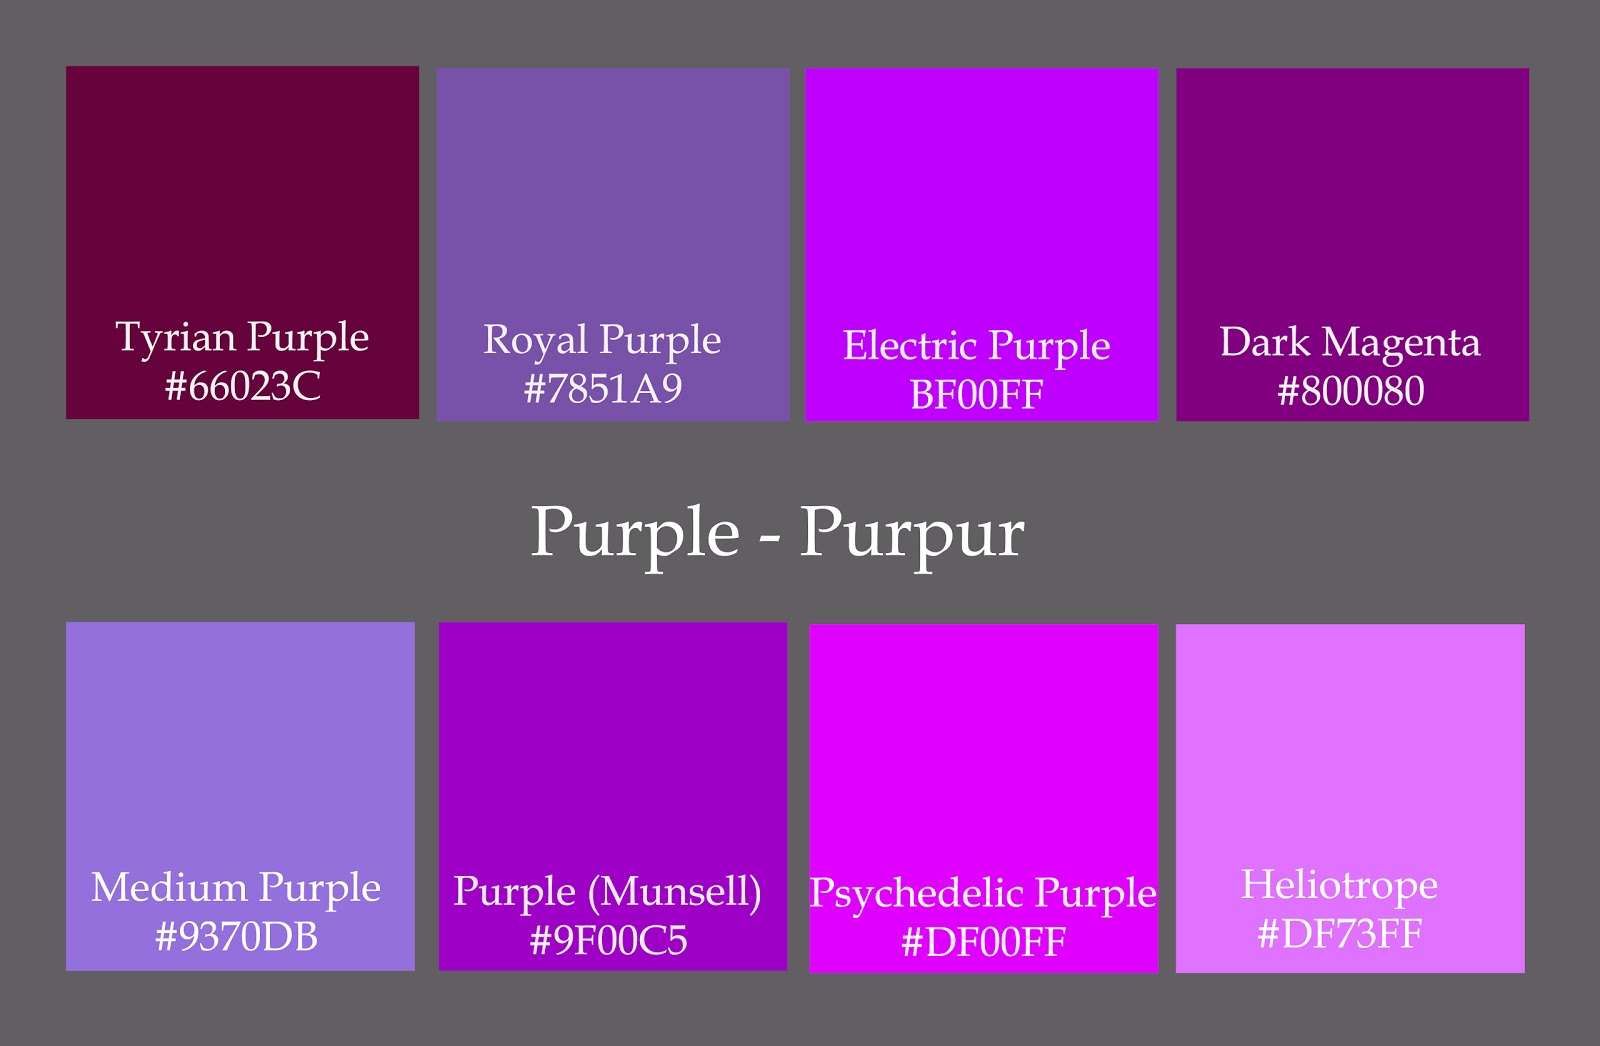 Purple Color Names Pictures To Pin On Pinterest Pinsdaddy Effy Moom Free Coloring Picture wallpaper give a chance to color on the wall without getting in trouble! Fill the walls of your home or office with stress-relieving [effymoom.blogspot.com]